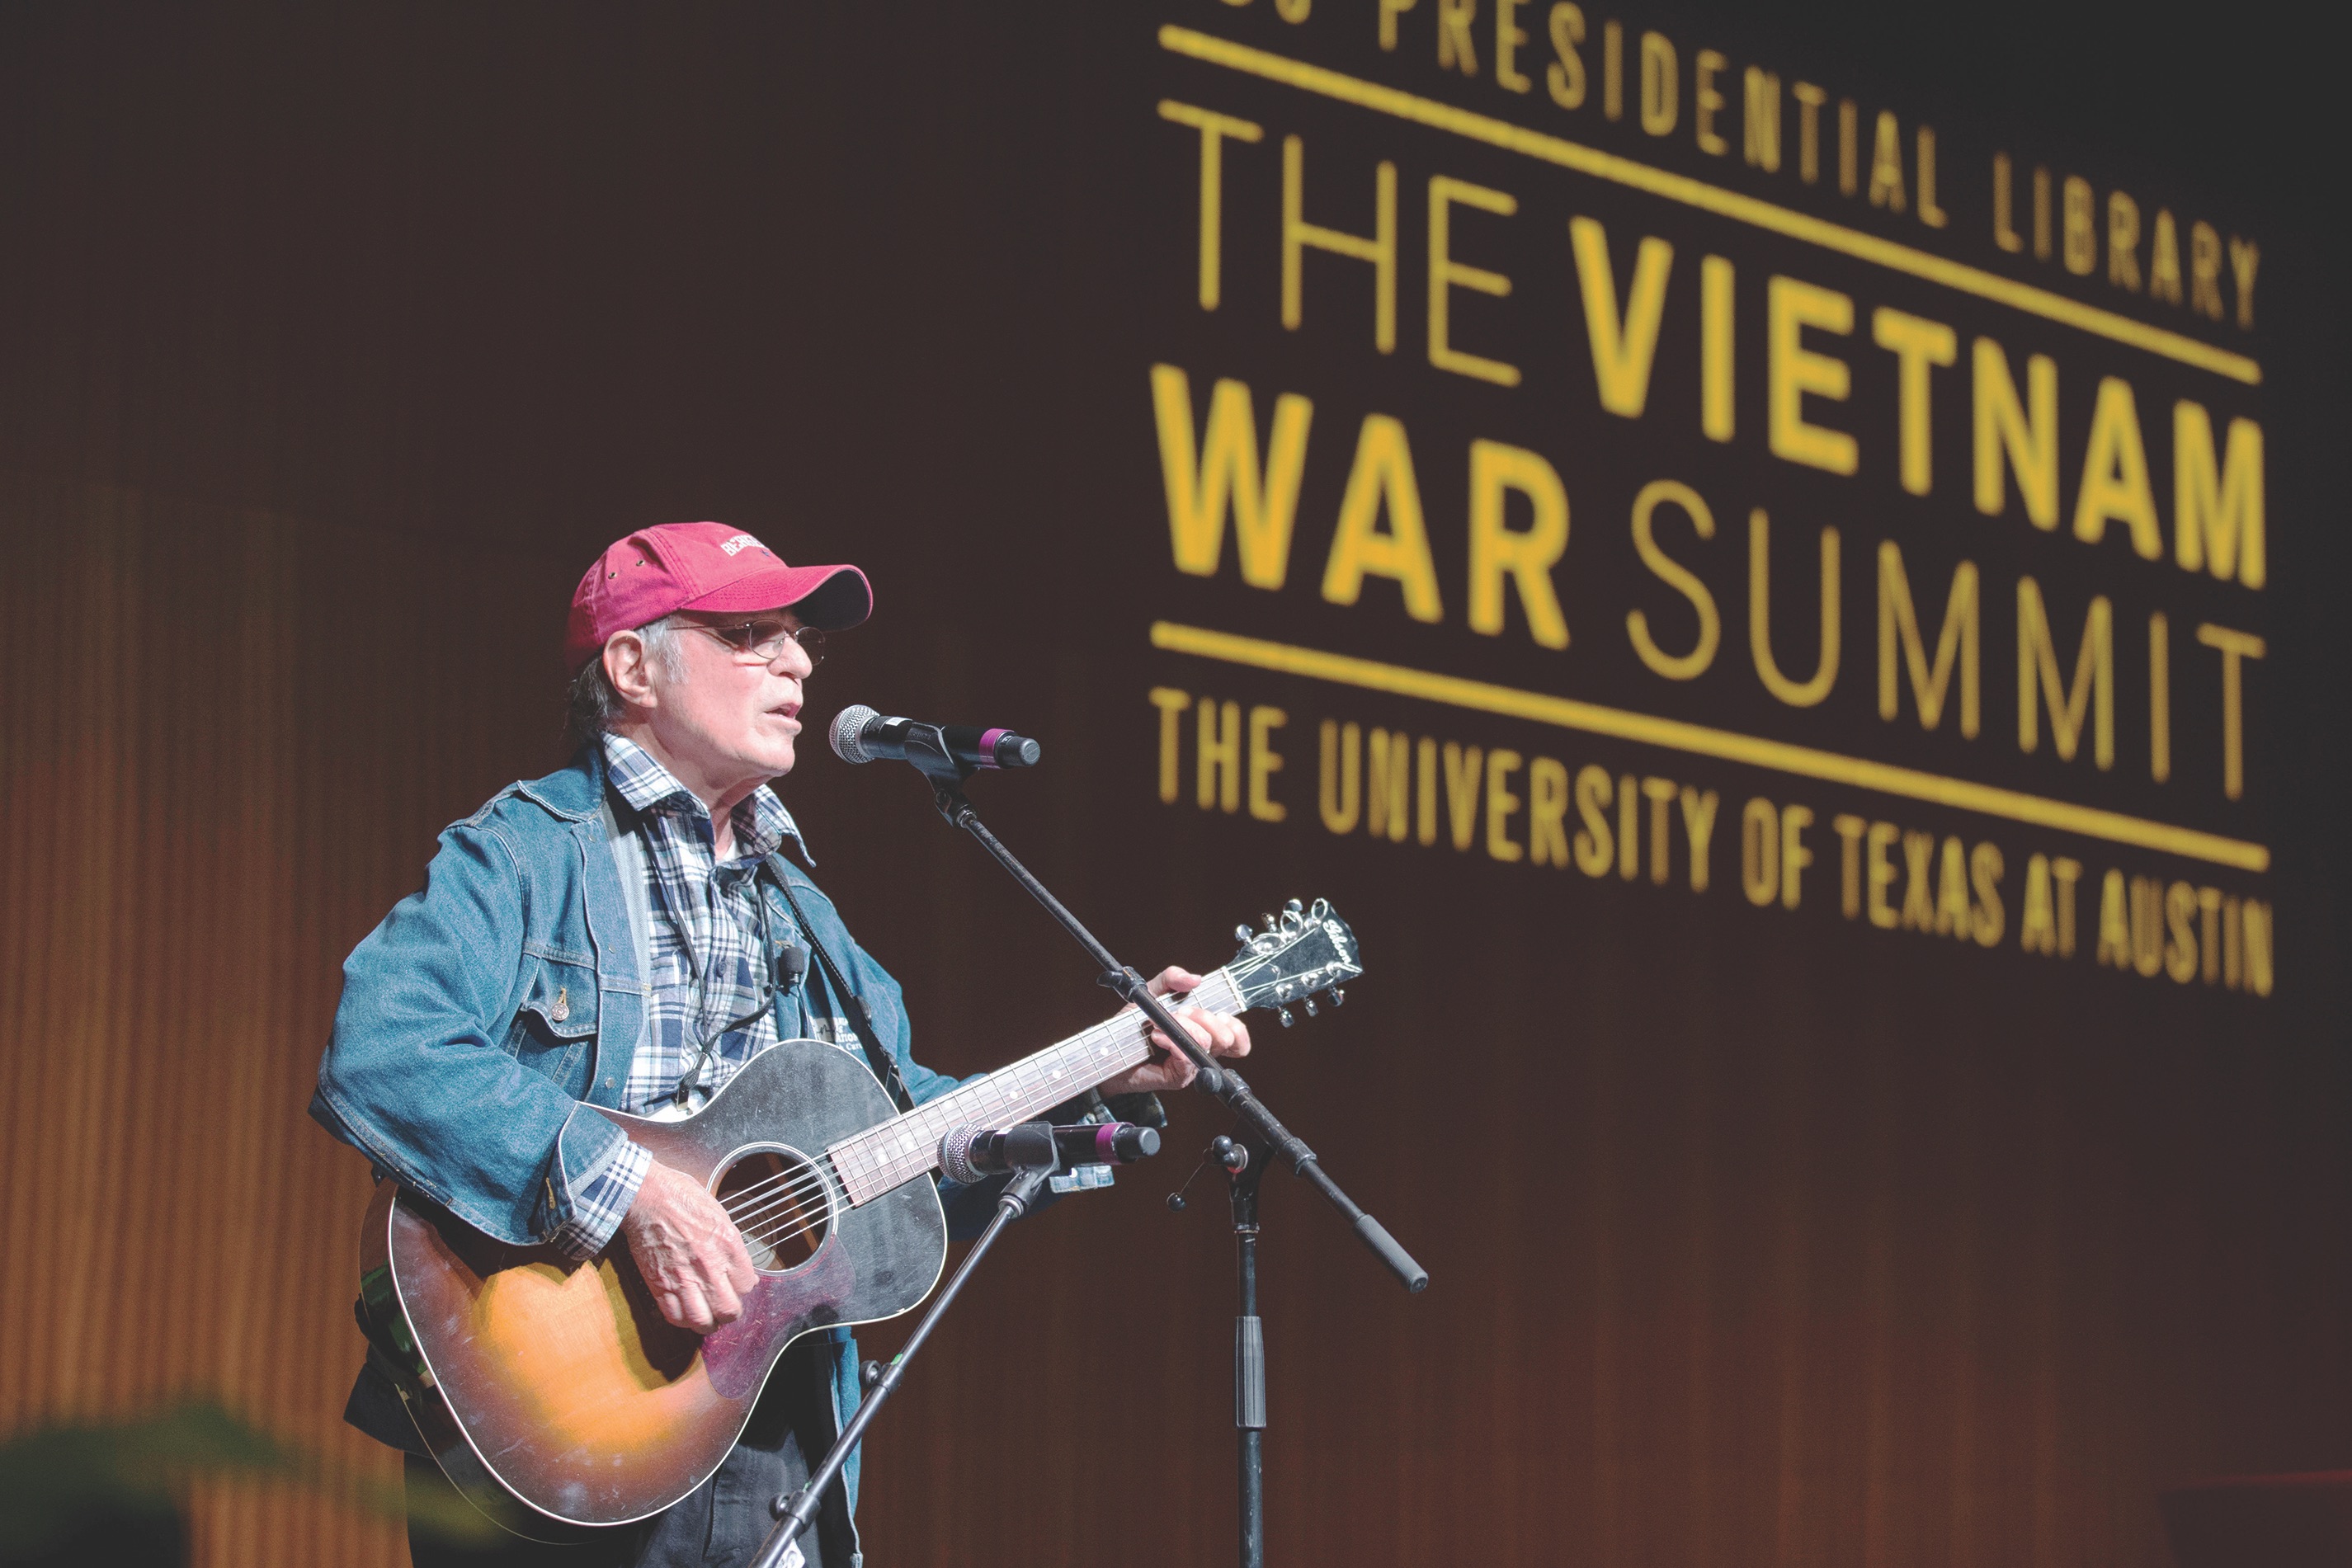 As part of the LBJ Presidential Library’s three-day Vietnam War Summit in 2016, McDonald performs some of his best known Vietnam-era protest songs at the University of Texas at Austin. (bob daemmrich (Alamy Stock Photo))